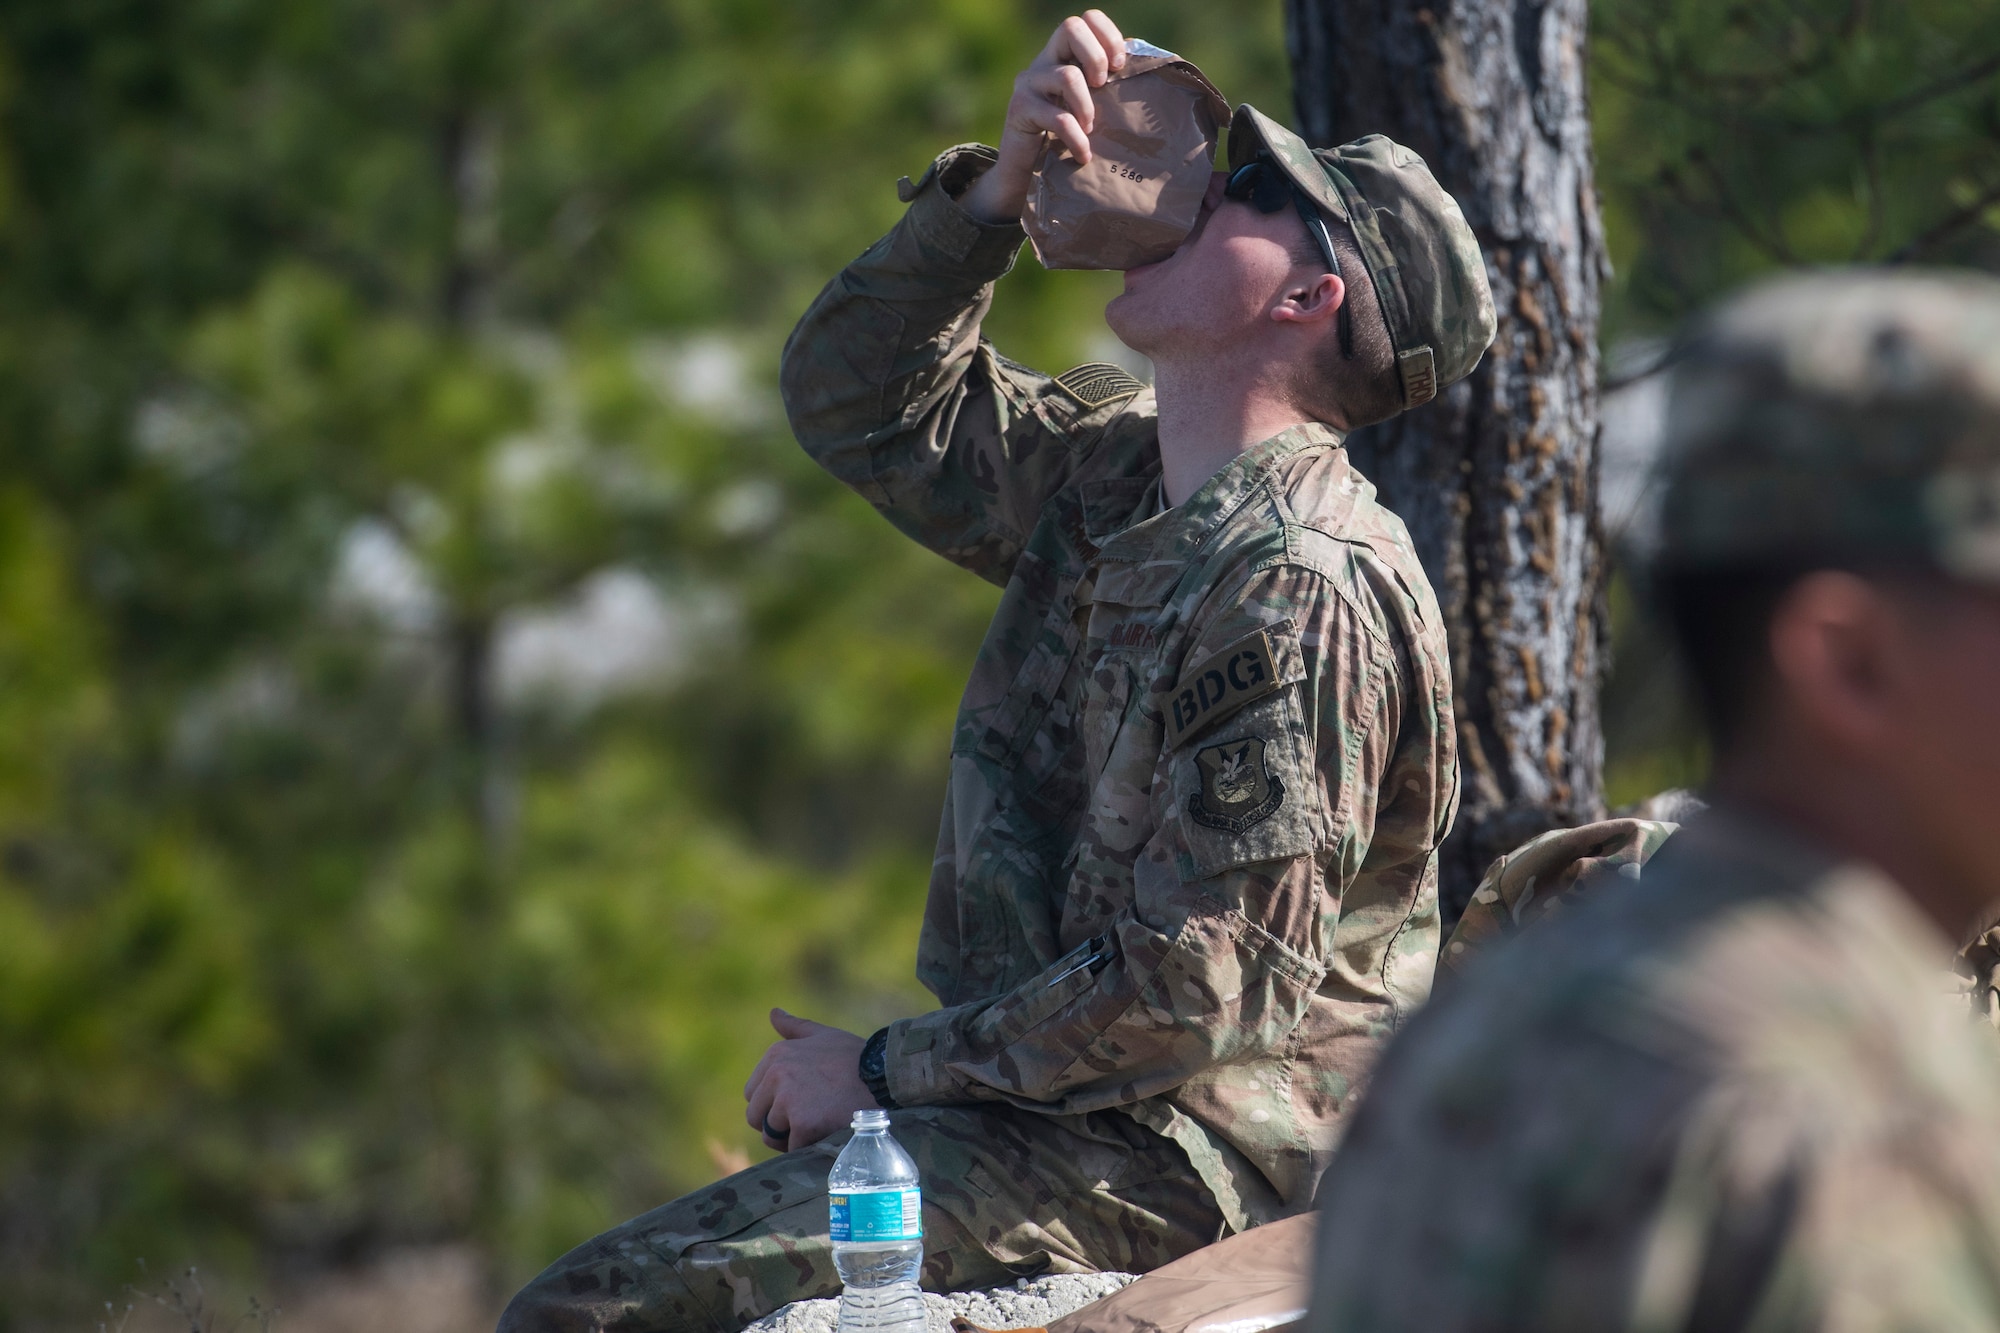 An Airman from the 824th Base Defense Squadron eats a snack during a break in training, Jan. 26, 2018, at Camp Blanding Joint Training Center, Fla. The Airmen traveled to Blanding to participate in Weapons Week where they qualified on heavy weapons ranging from the M249 light machine gun to the M18 Claymore mine. (U.S. Air Force photo by Senior Airman Janiqua P. Robinson)